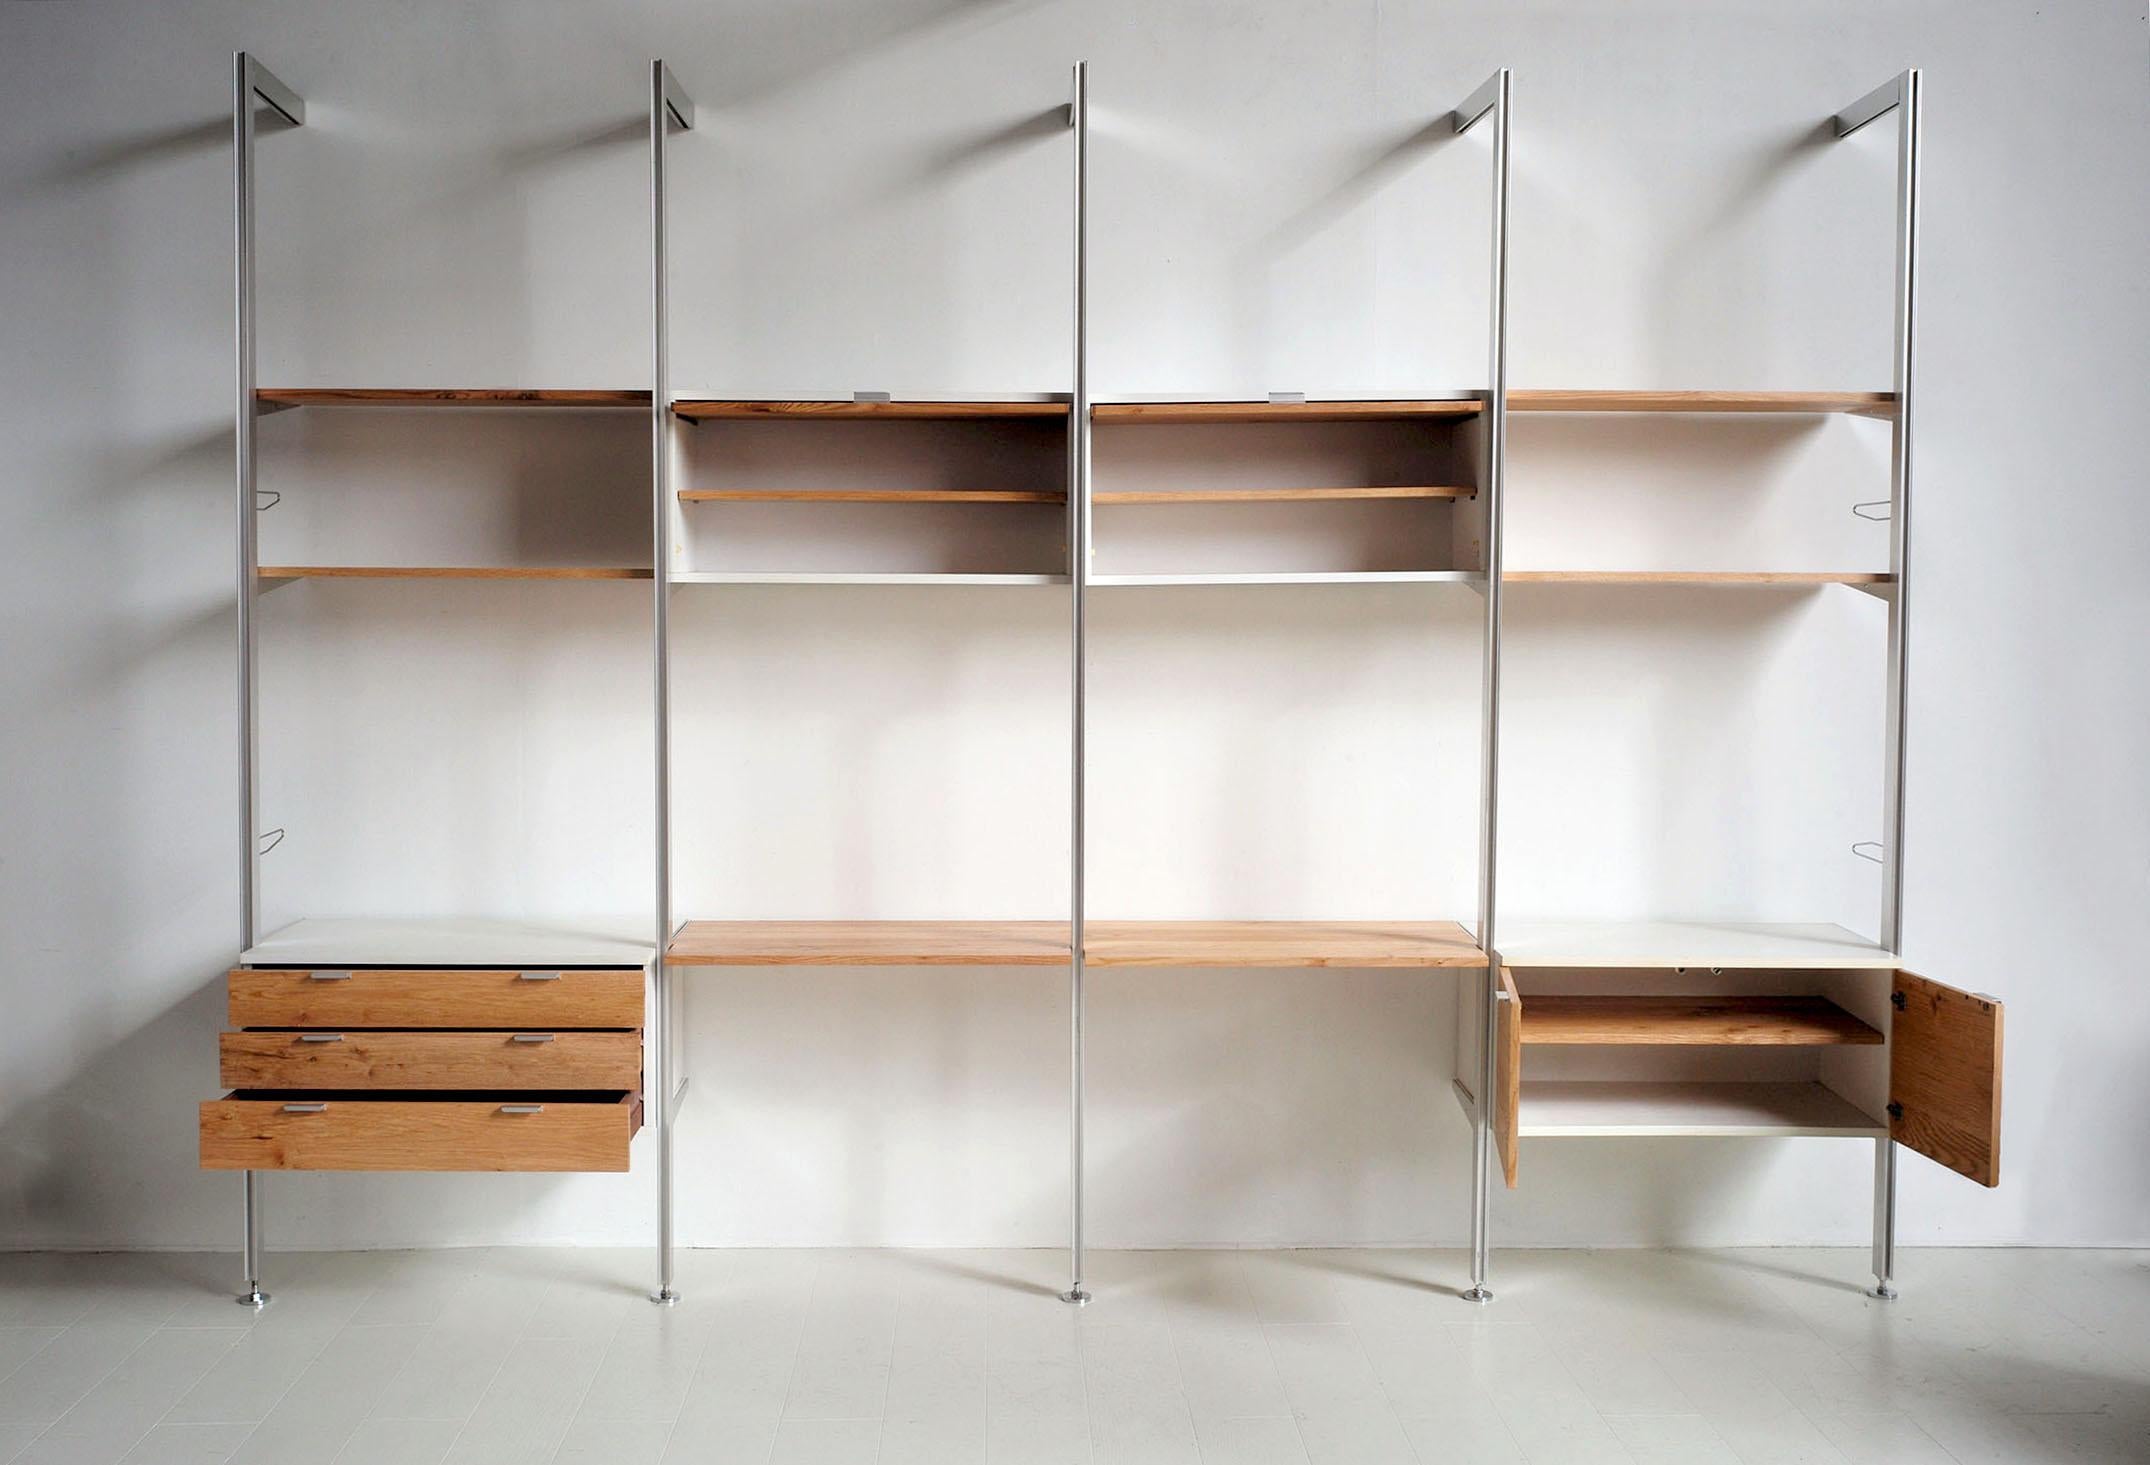 Unique version of the CCS bookcase by Georges Nelson in white melamine and American oak, published by Mobilier international, 1970. The fronts and shelves have been redone in solid red oak. Equipped with 5 floor-to-wall columns, this large bookcase